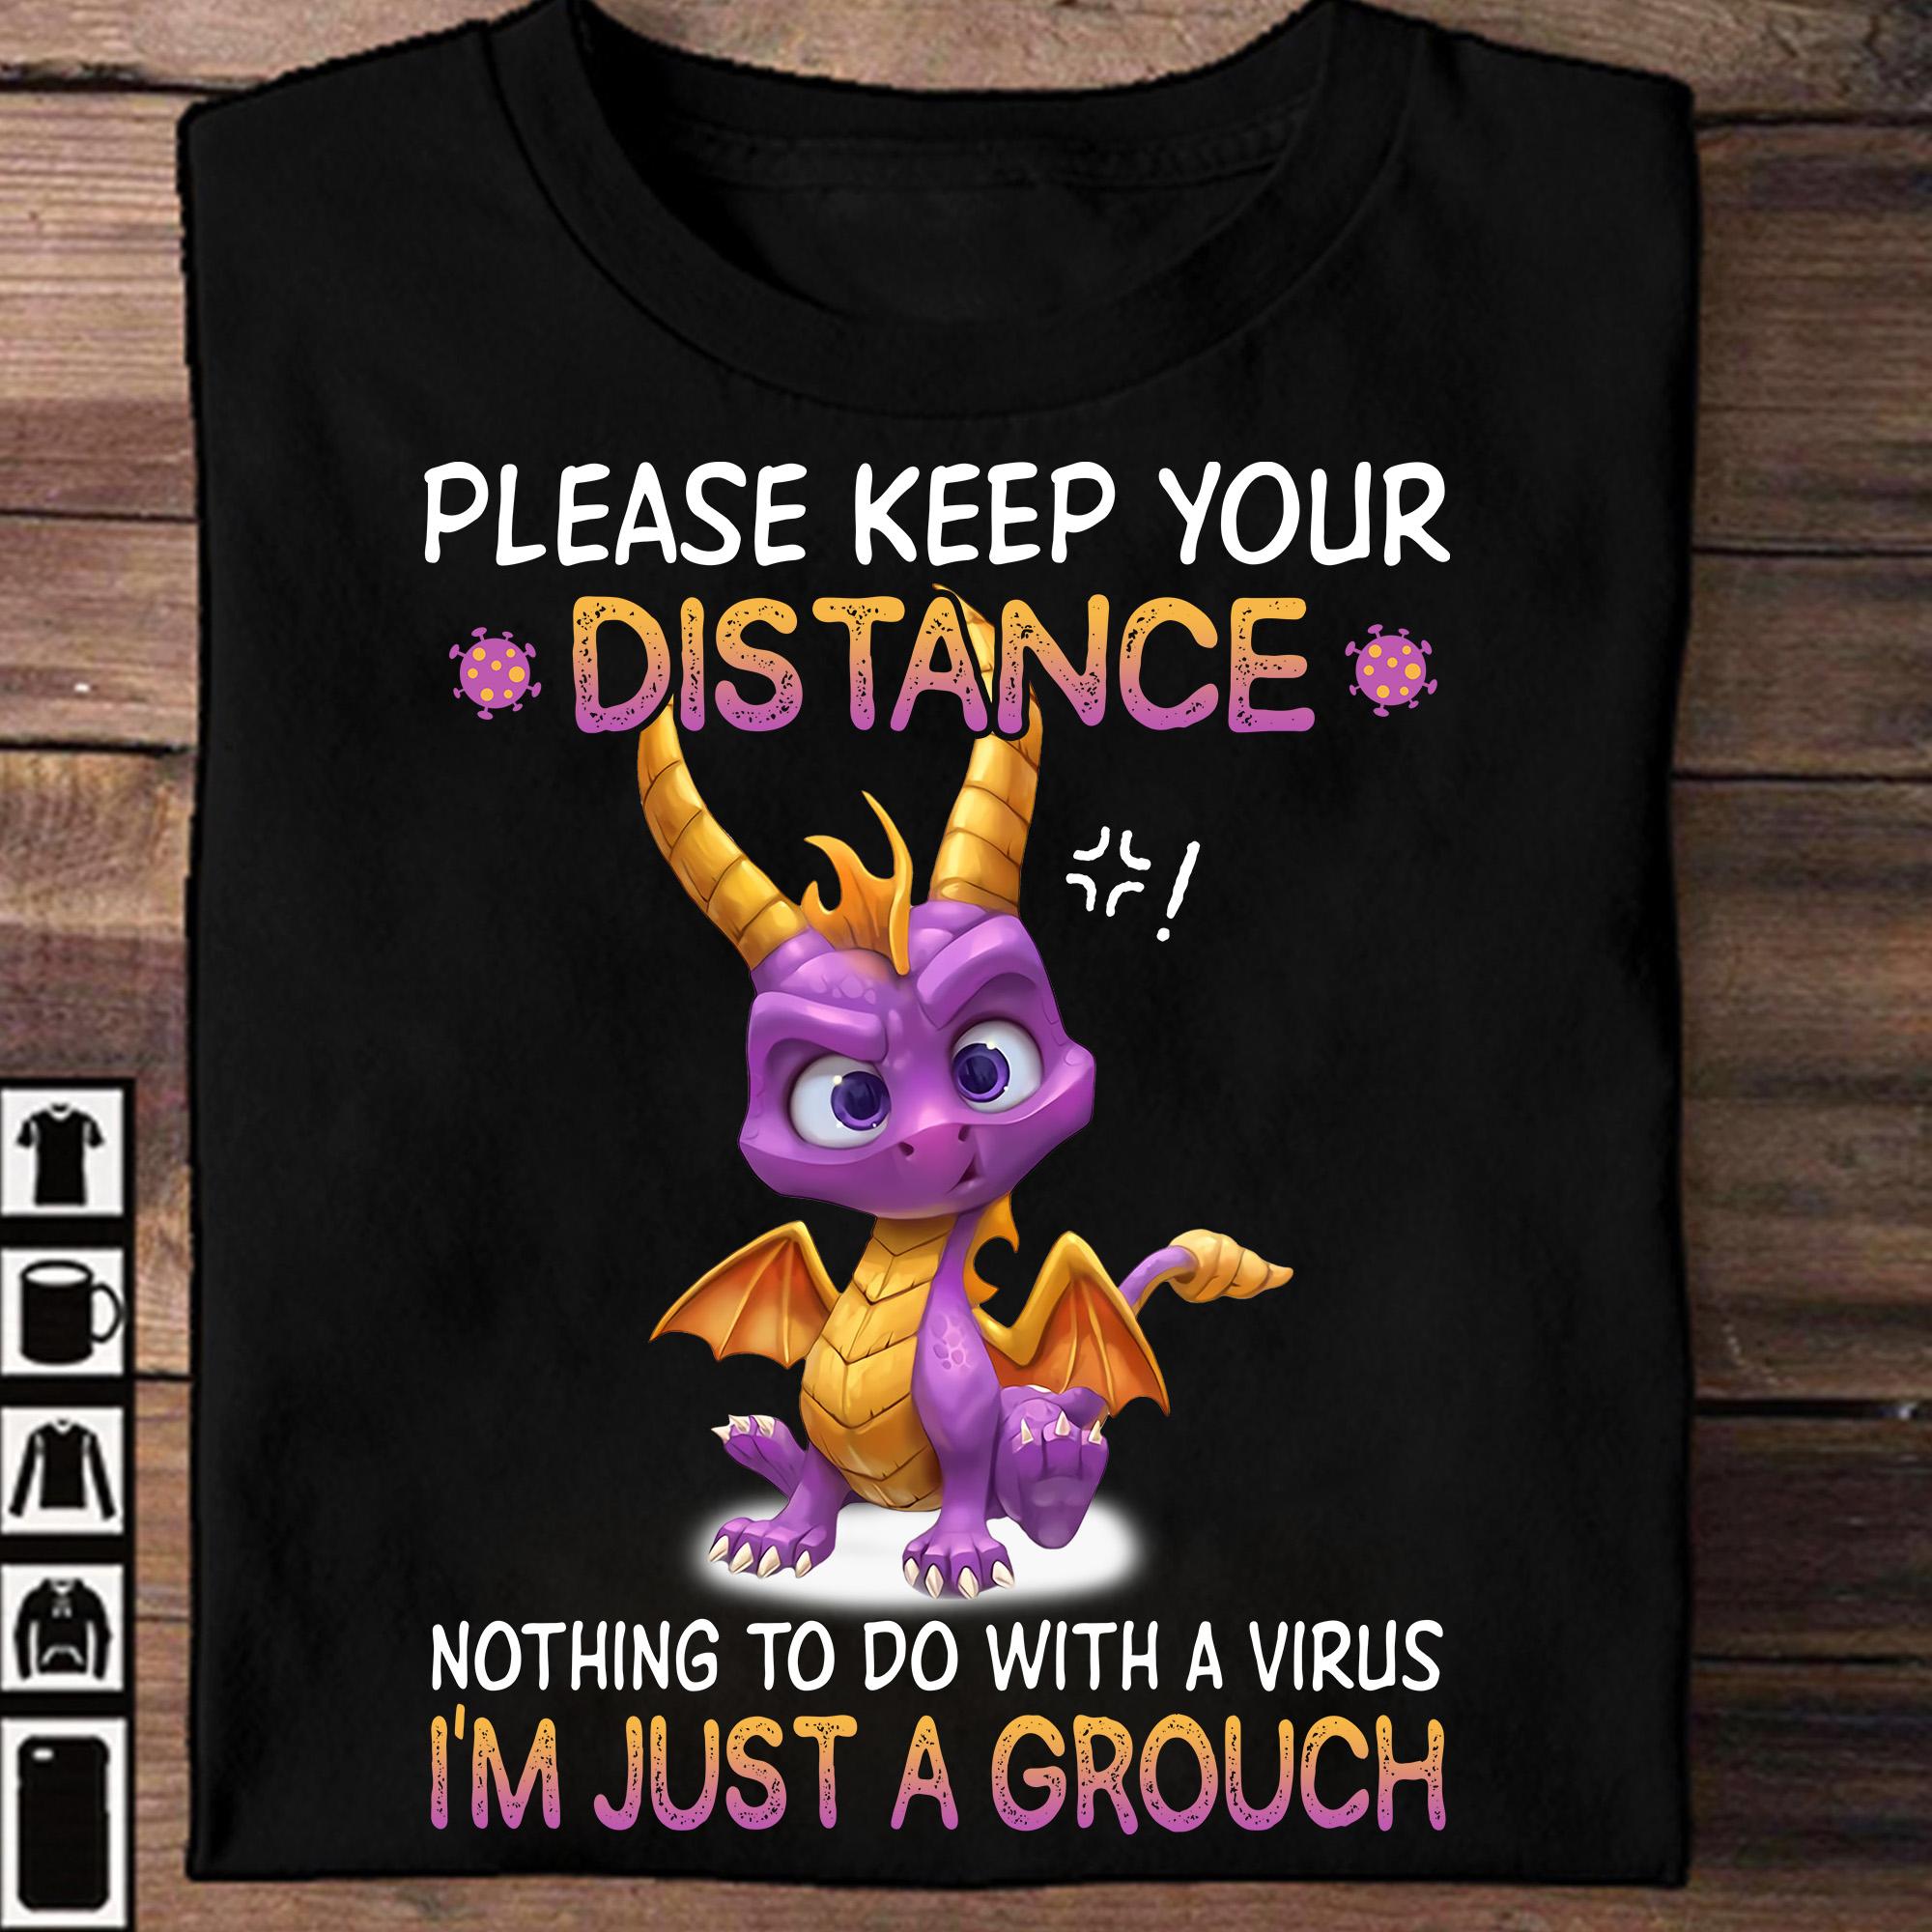 Please keep your distance nothing to do with a virus I'm just a grouch - Gorgeous baby dragon